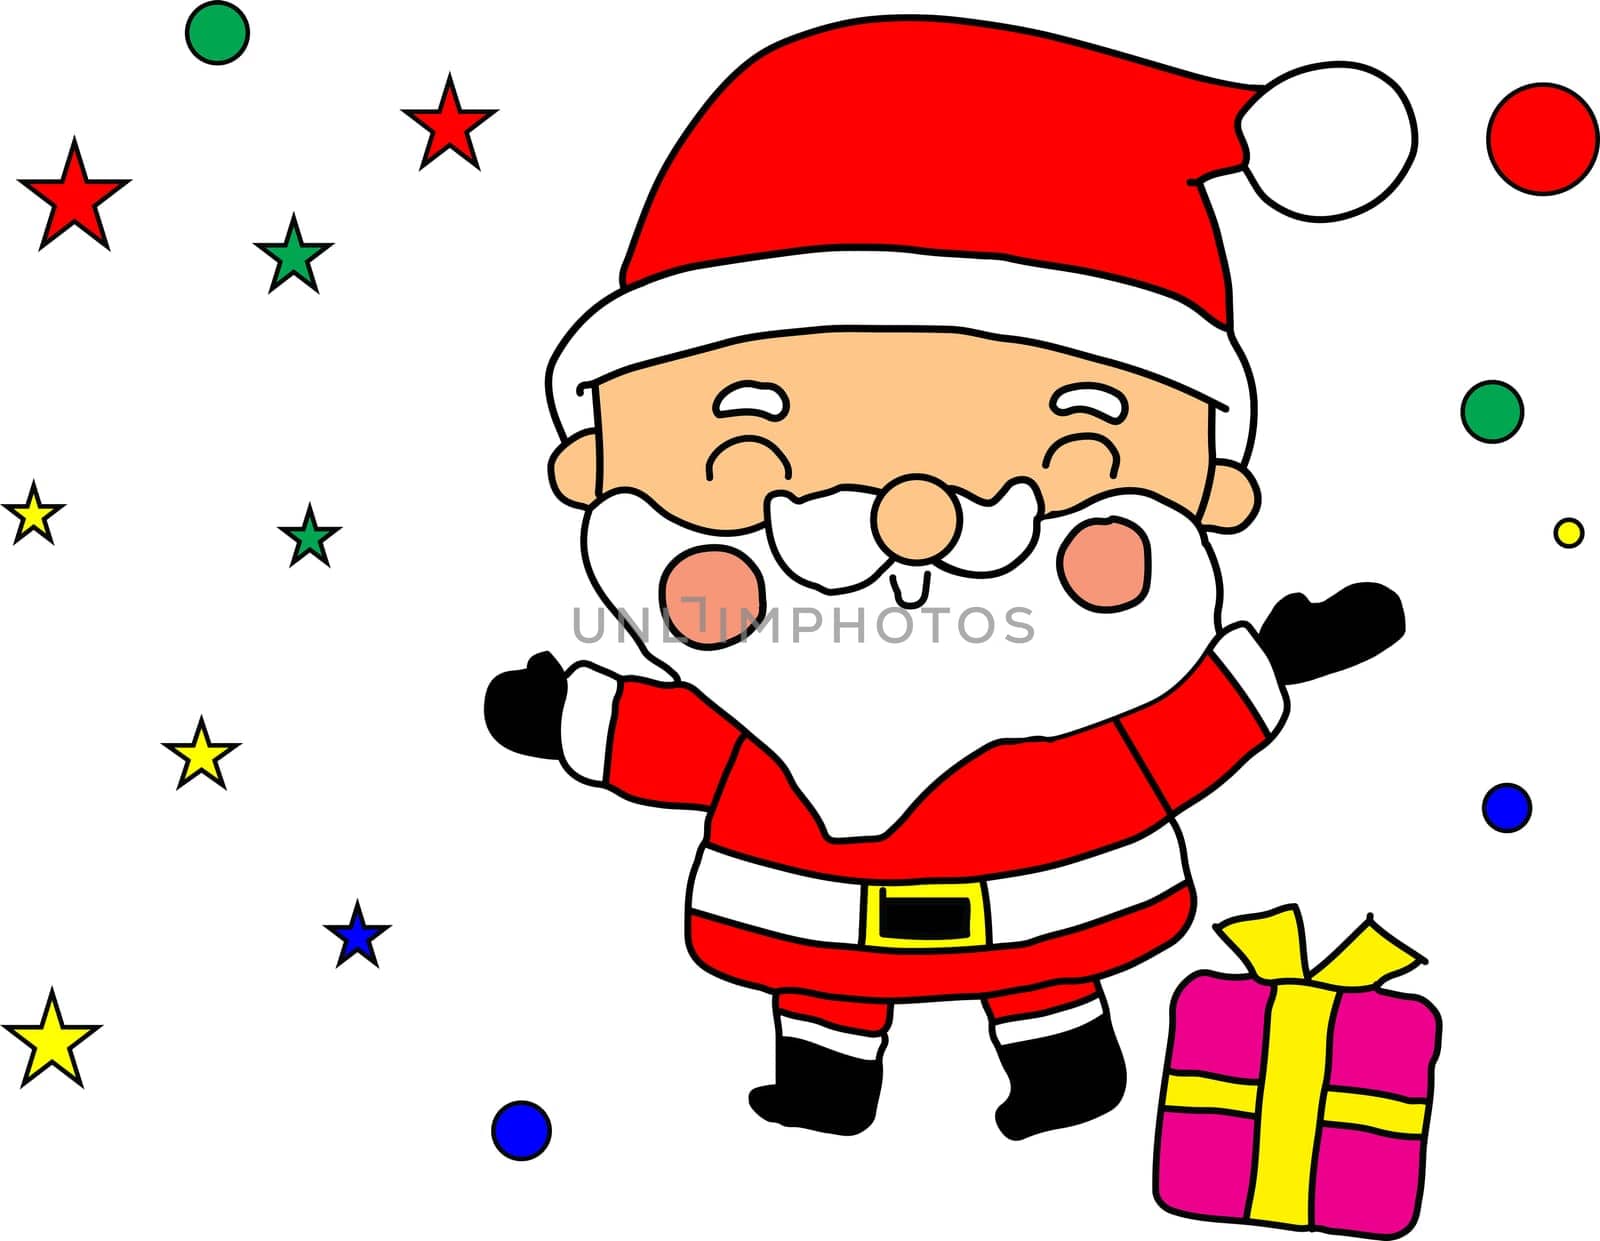 Cartoon Santa Claus holding a present, smiling and giving a thumbs up by cr8image